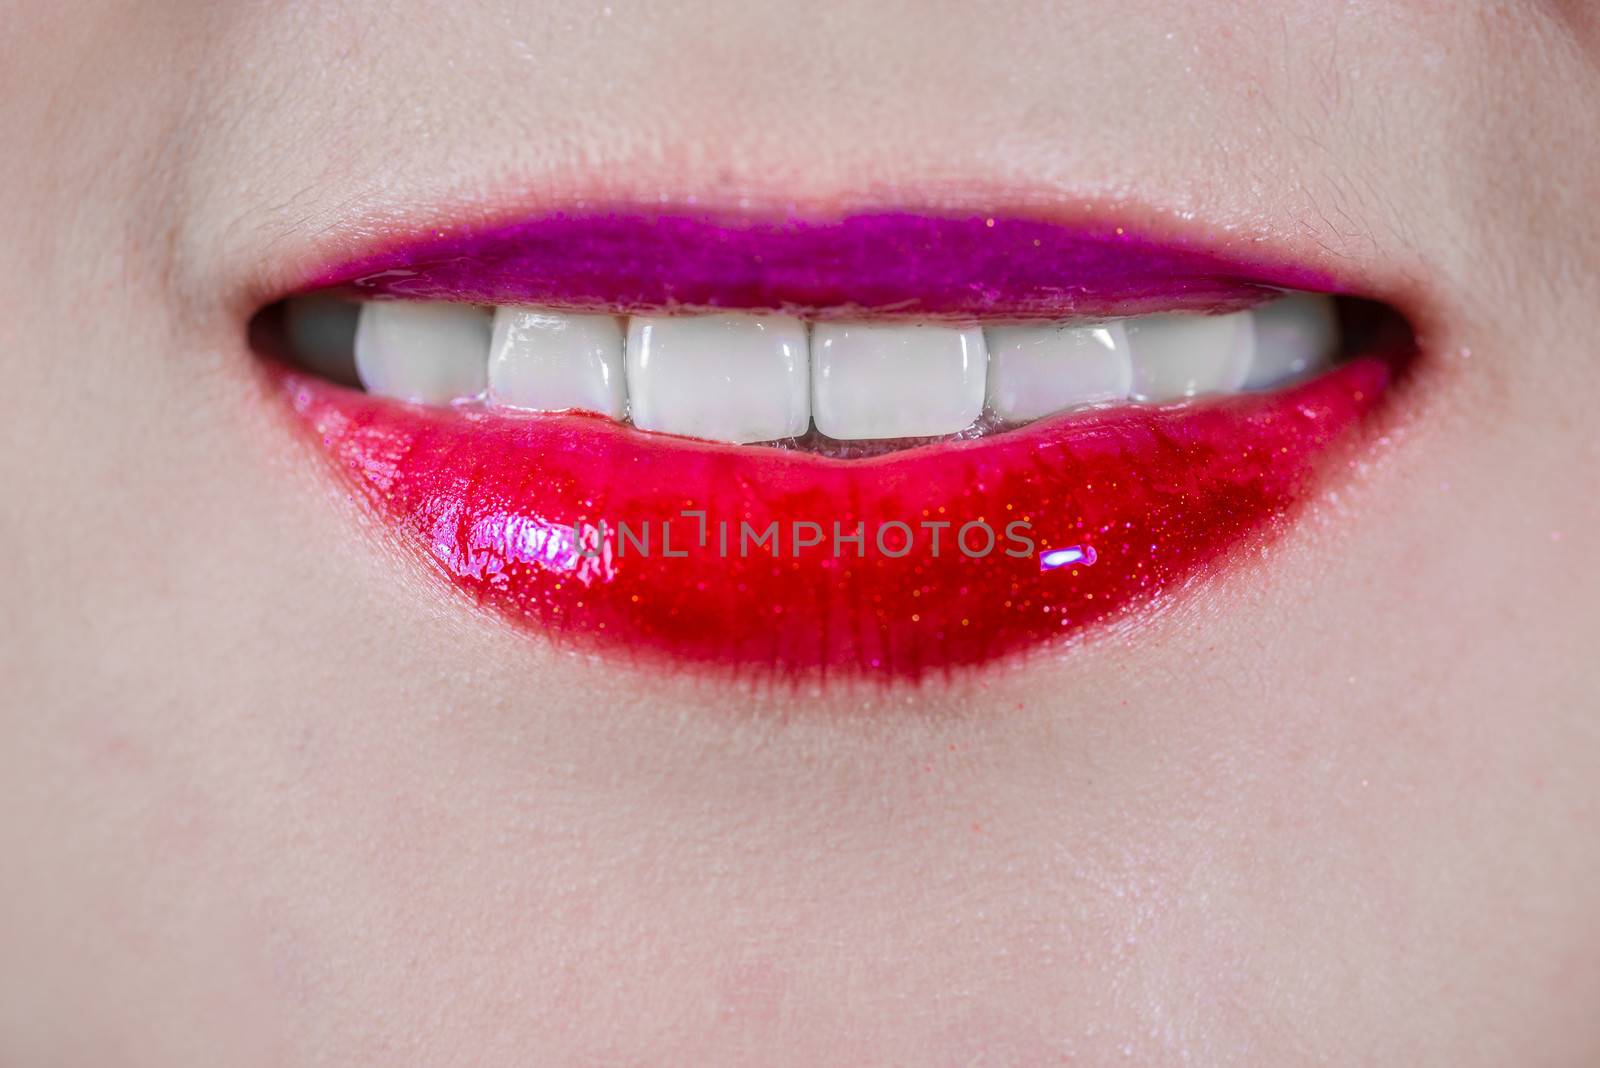 Woman lips with makeup smiling by IVYPHOTOS